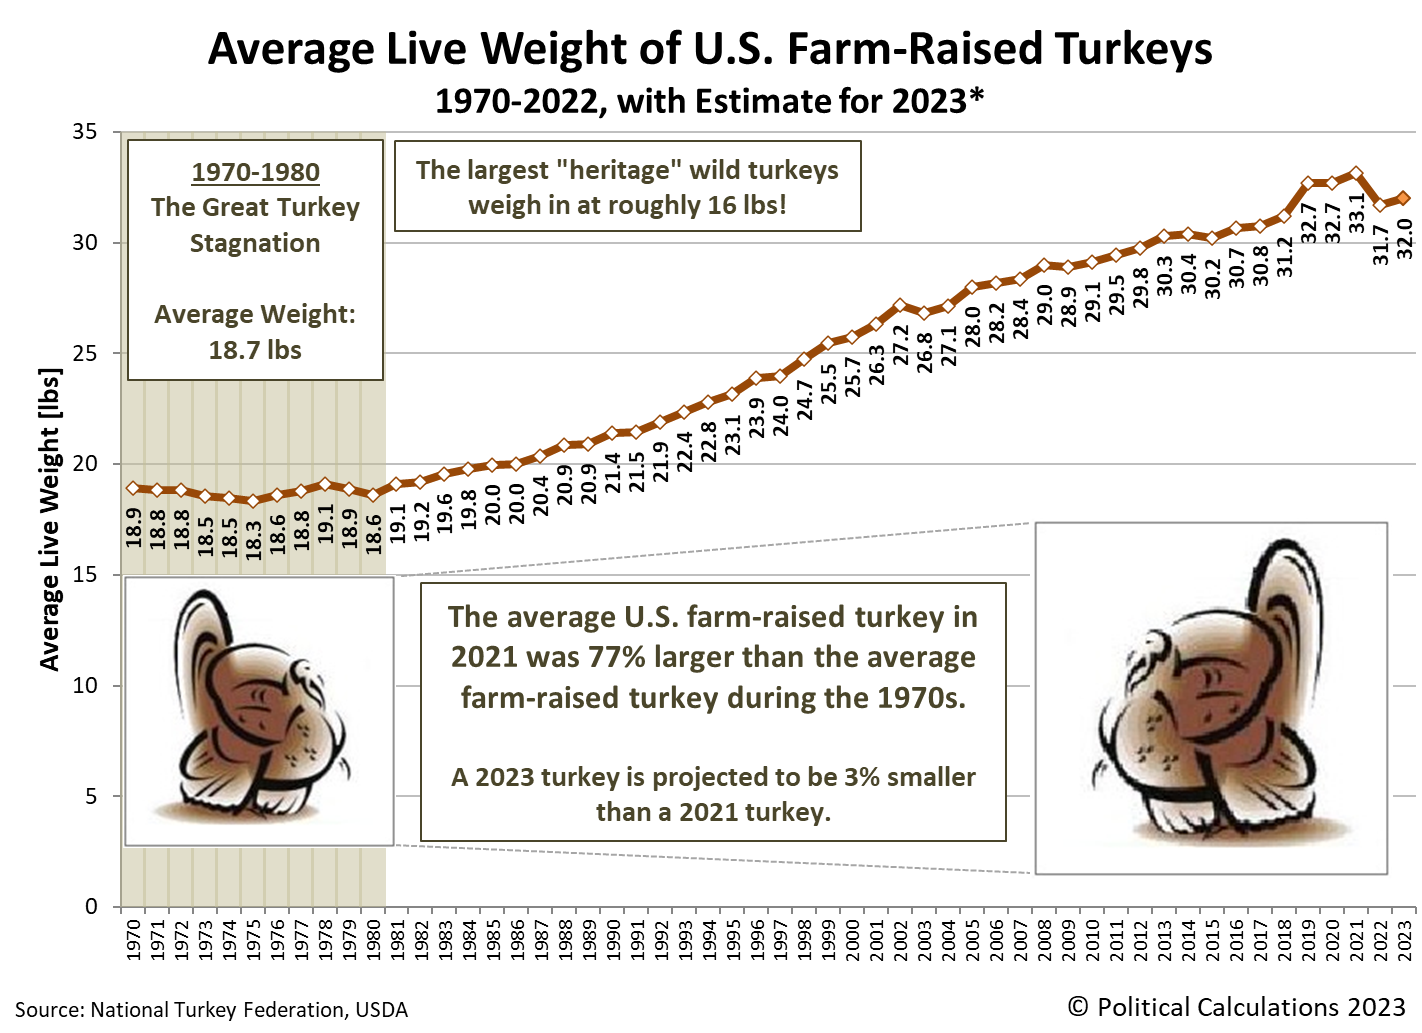 Average Live Weight of U.S. Farm-Raised Turkeys, 1970-2022 with Estimate for 2023